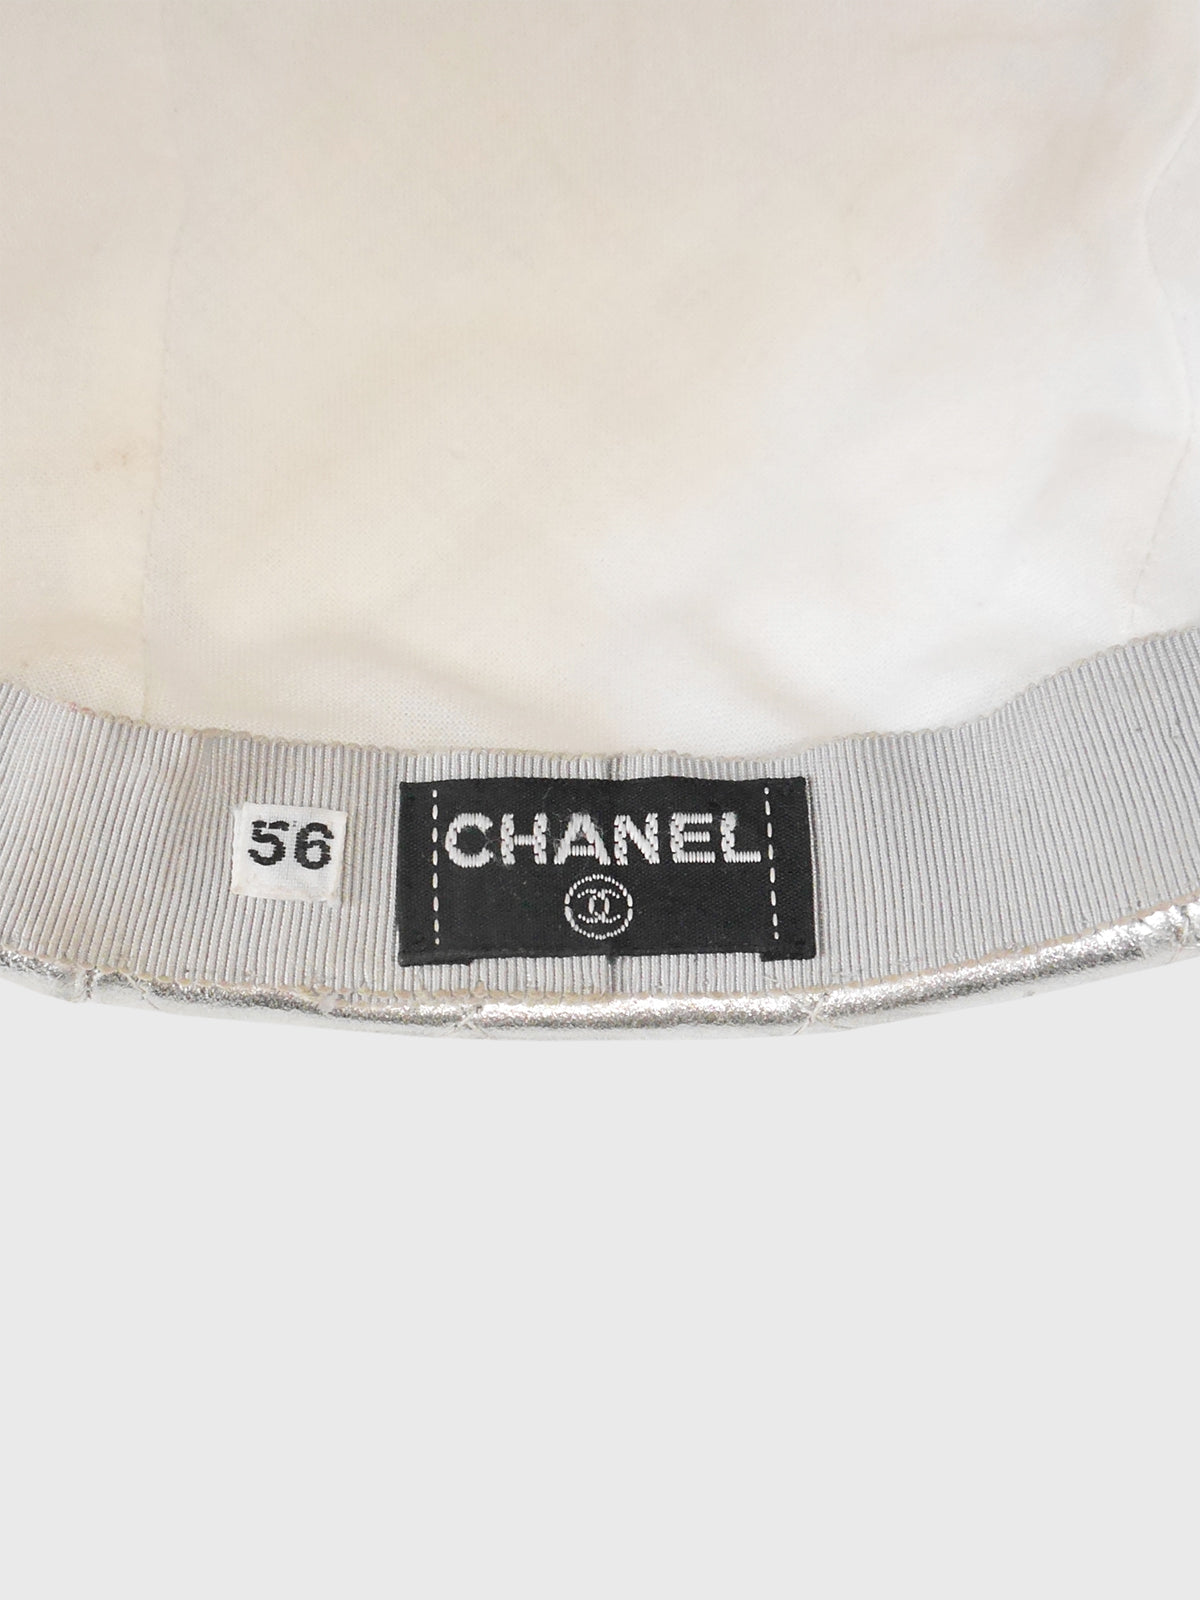 CHANEL Fall 1991 Vintage Silver Quilted Lambskin Leather Cap